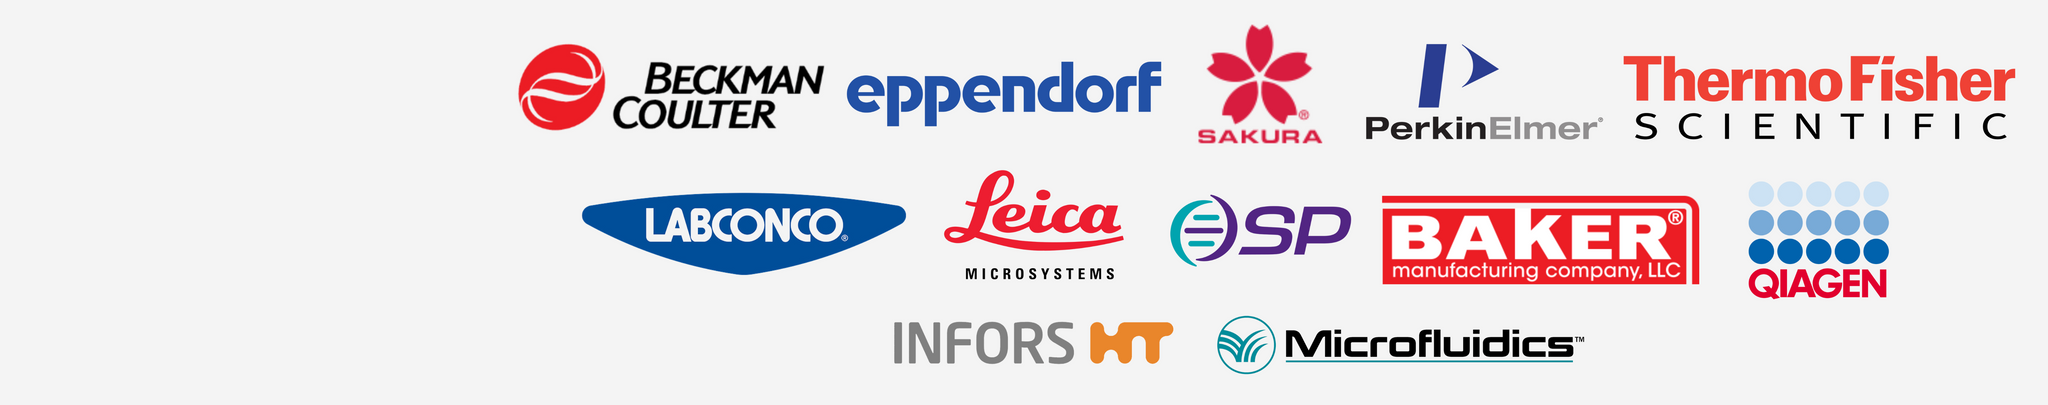 Banner image featuring various lab euqipment manufacturers